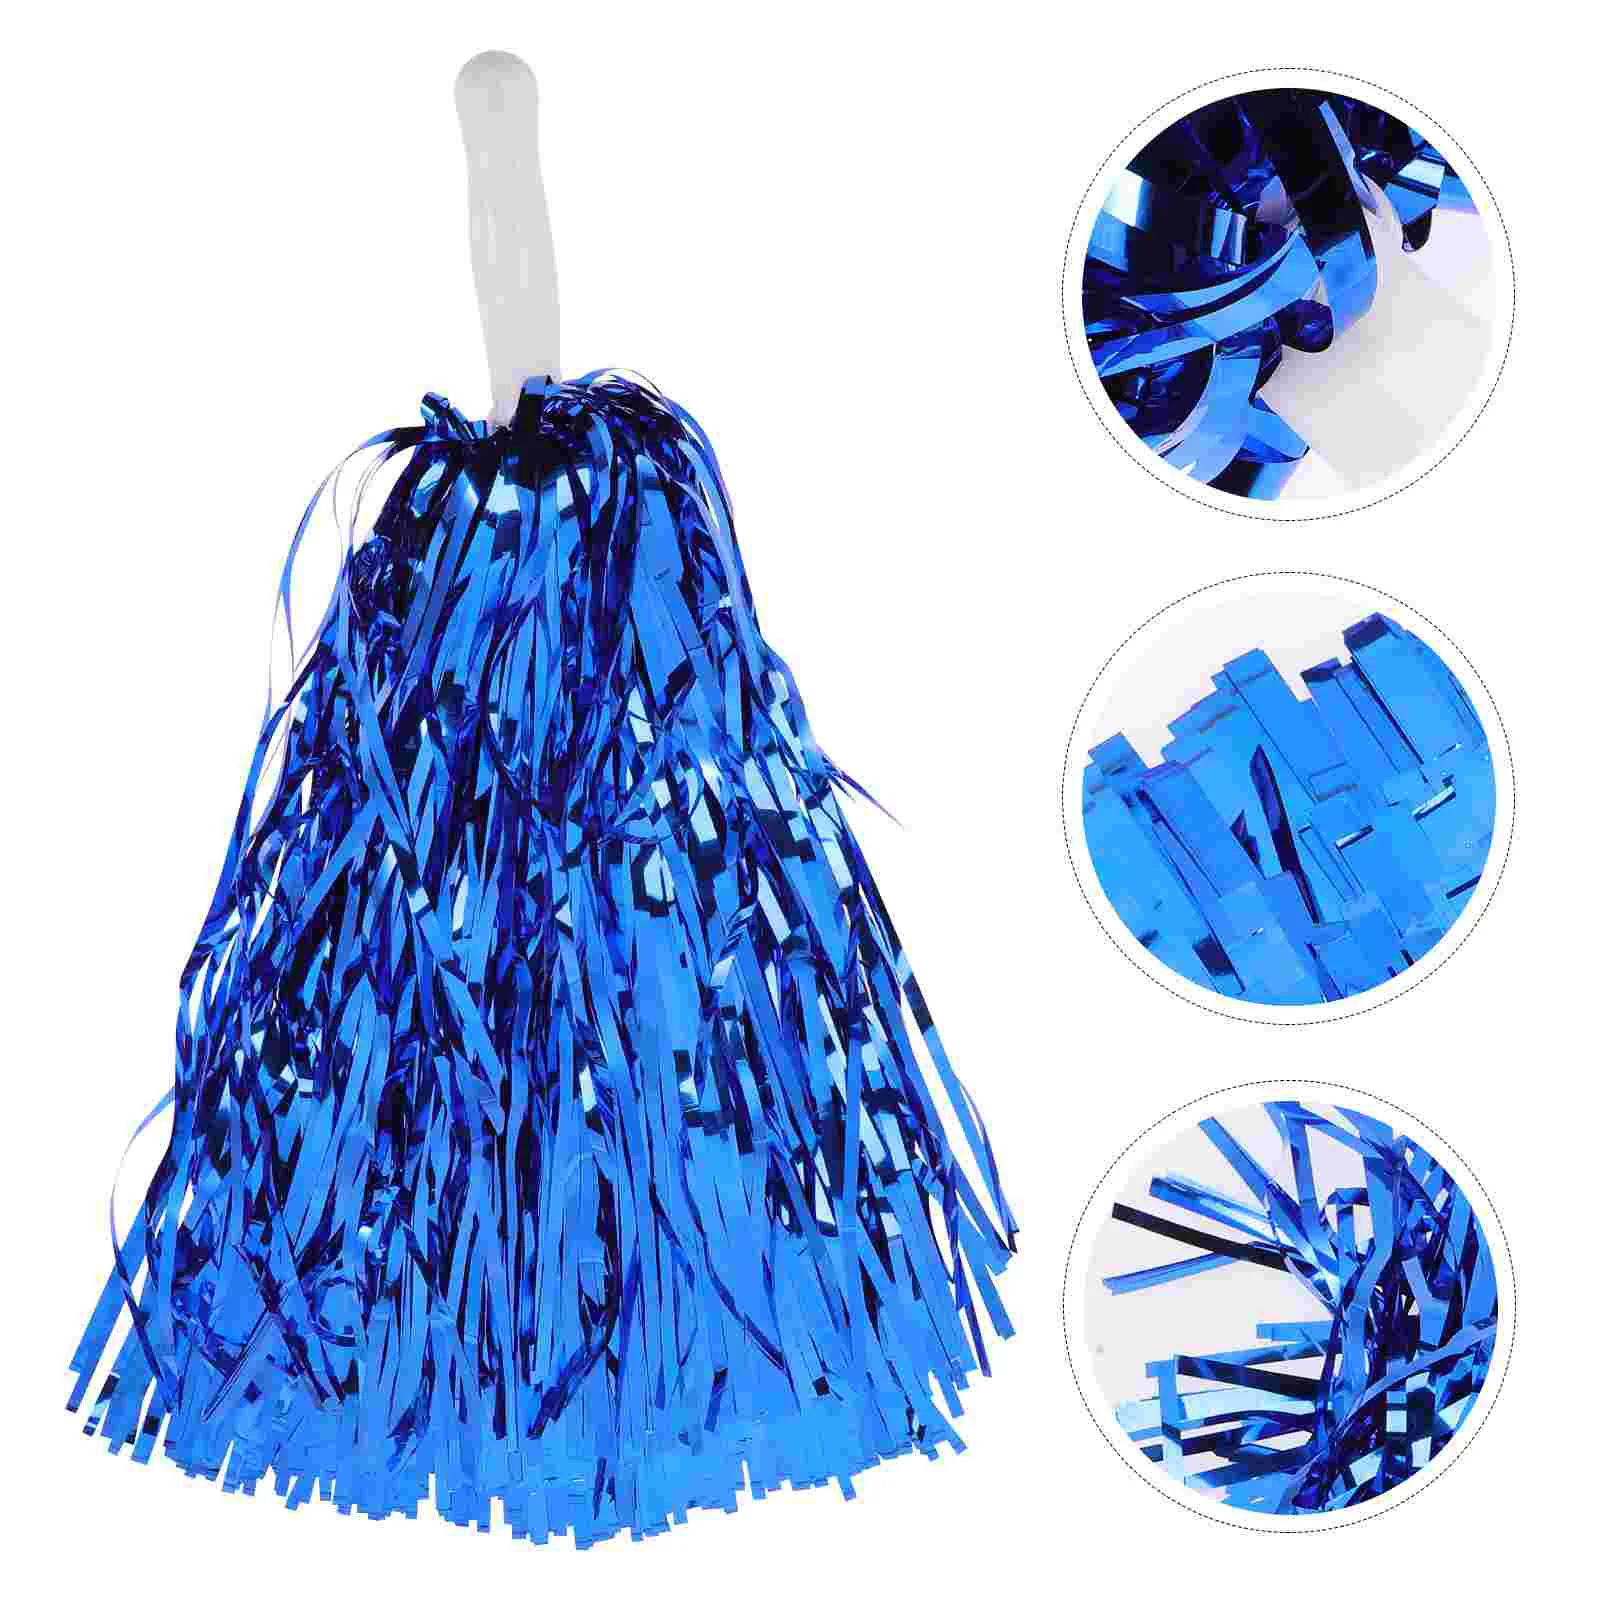 4pcs Cheerleader Pom Poms Cheerleading Cheering Props for Sports Game Dance Party 12 pcs cheerleading hand flower ballpit balls pom poms delicate props cheering the pet cheerleader compact sports meeting